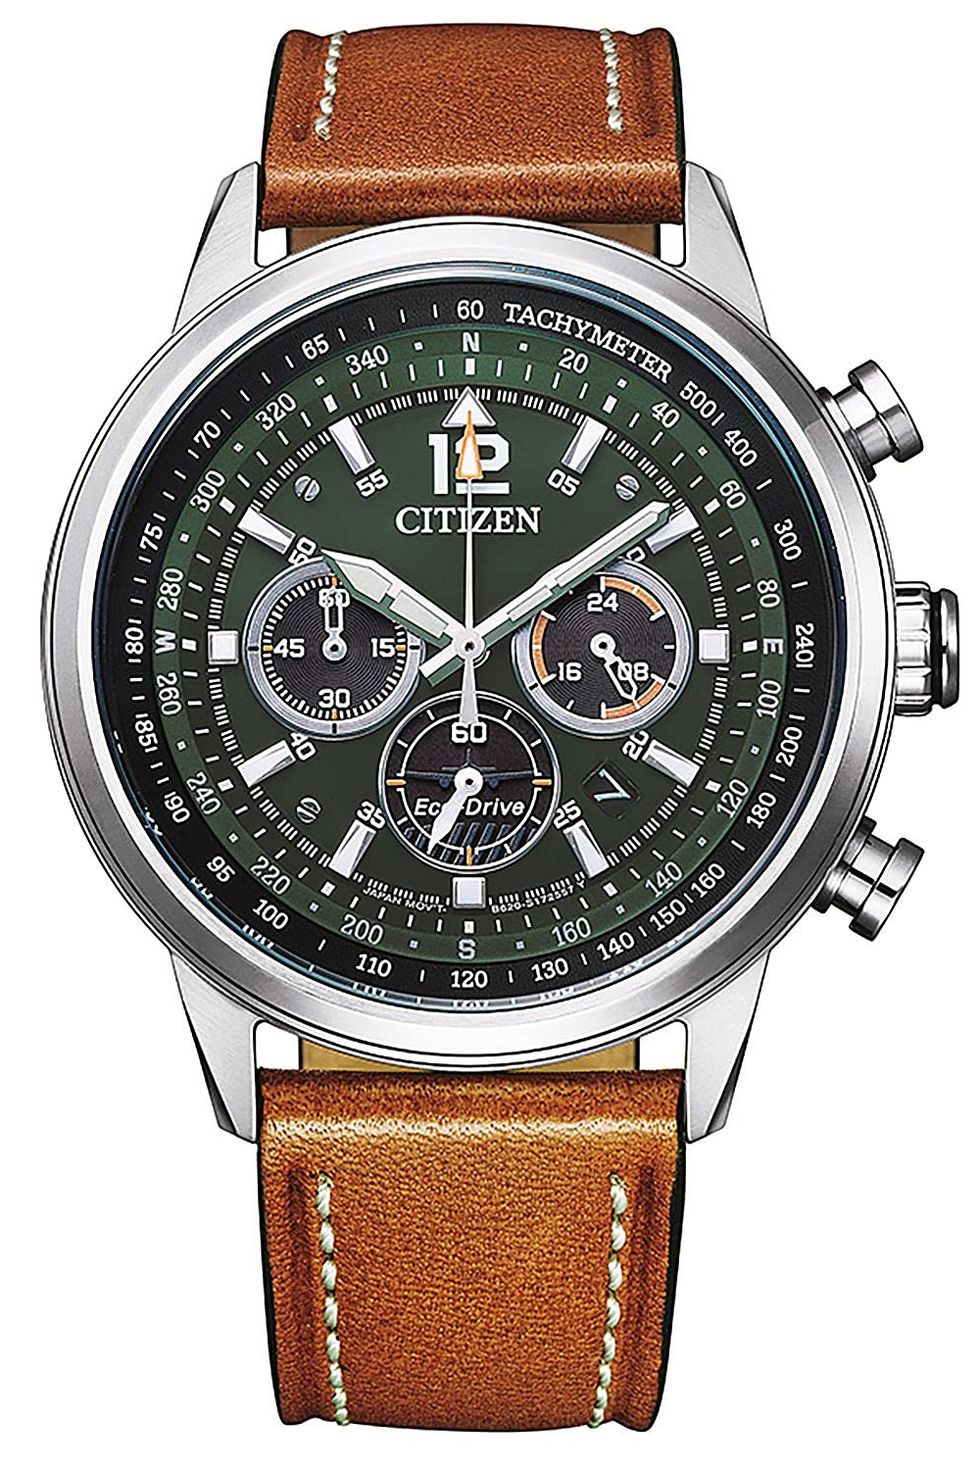 Aviator Eco-Drive watch with leather strap